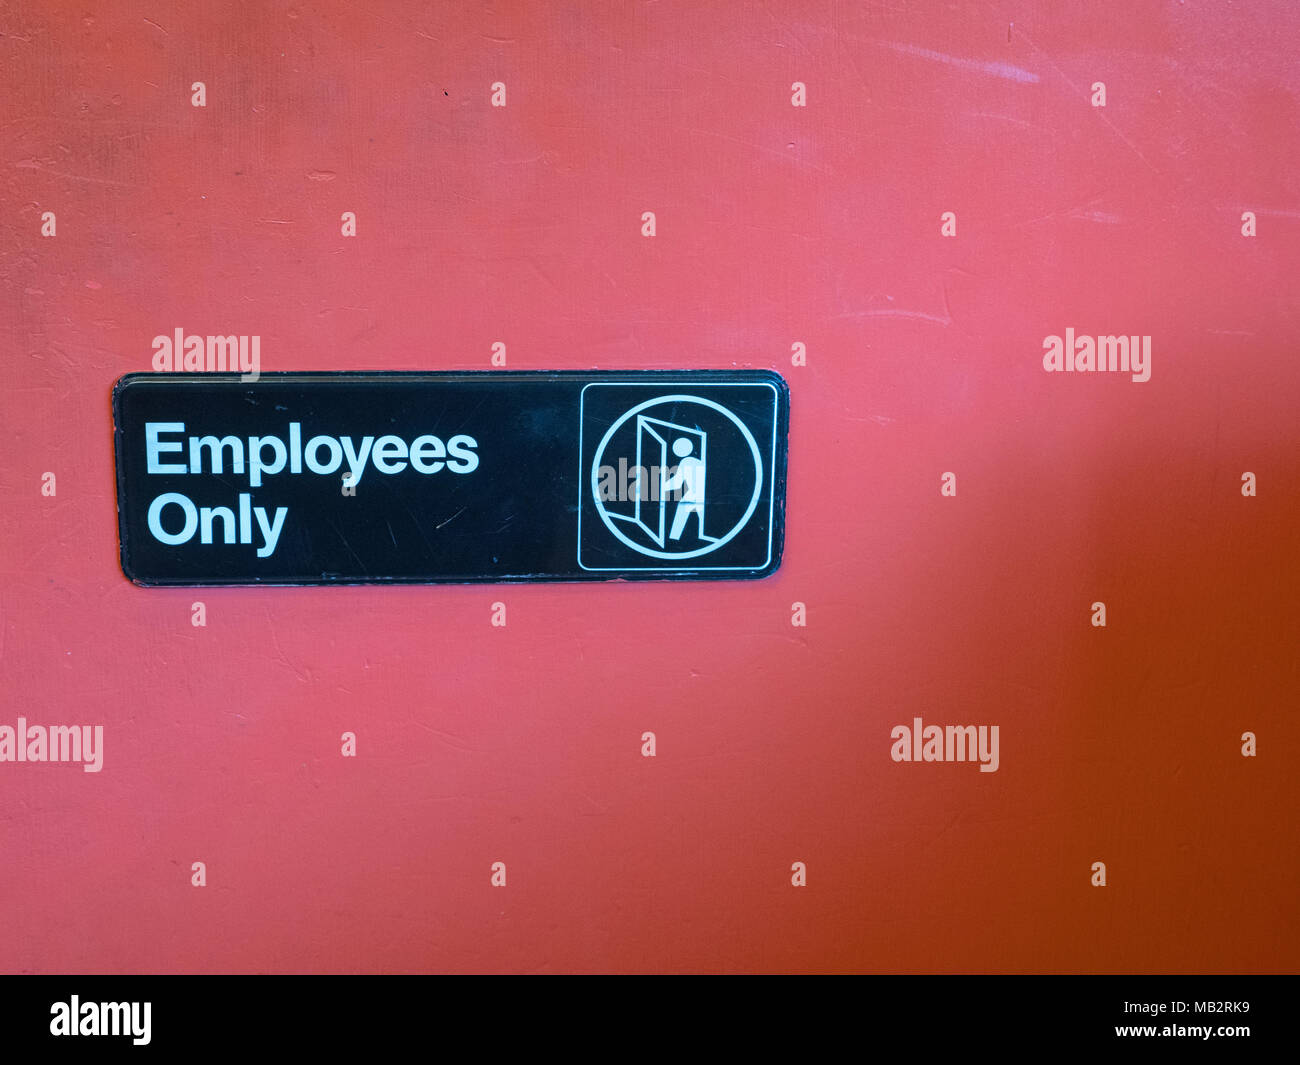 Employees only sign with space to right Stock Photo